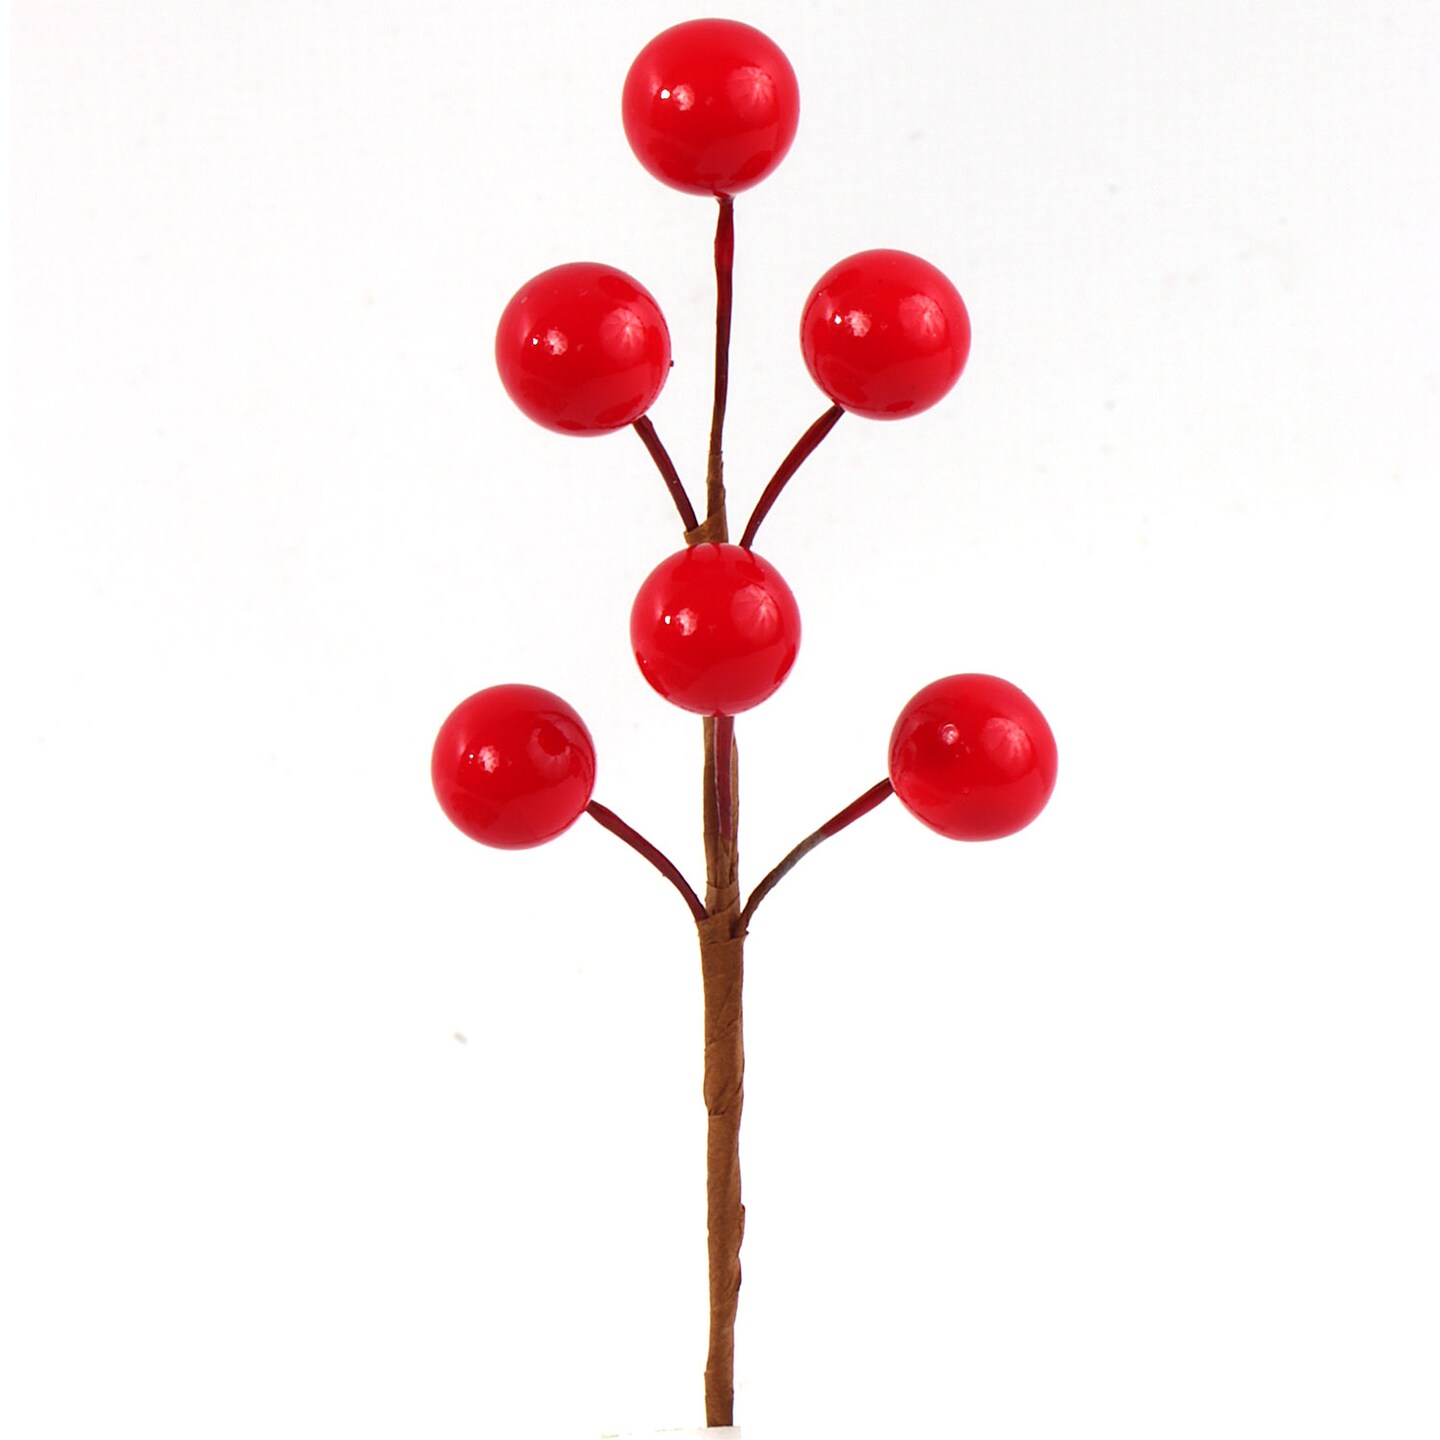 Red Mini Holly Berry Picks with Lifelike Berries, 10mm, Holiday Xmas  Picks, Decorative Berry Picks for Trees, Wreaths, & Garlands, Christmas  Collection, Home & Office Decor (8DZ/BG)